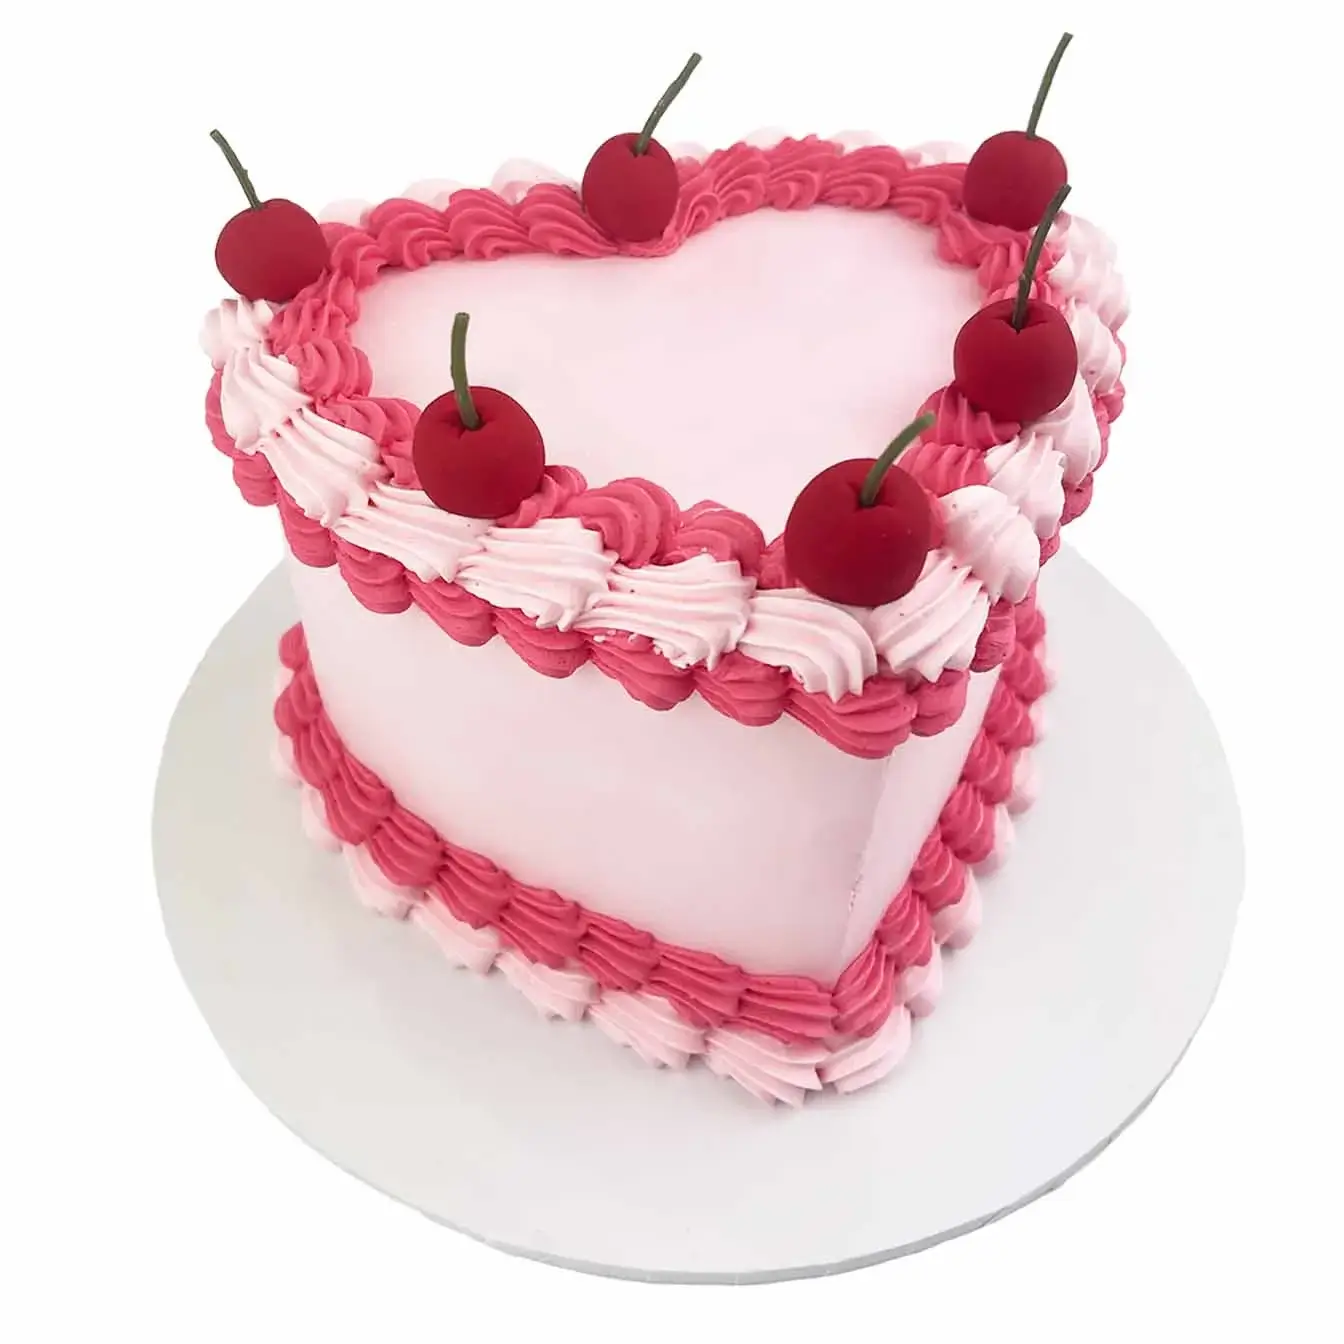 Pretty in Pink Cherry Heart Cake - A pink cake with a heart design created through delicate piping and adorned with molded cherries, a sweet and charming centerpiece perfect for celebrating love and special moments.